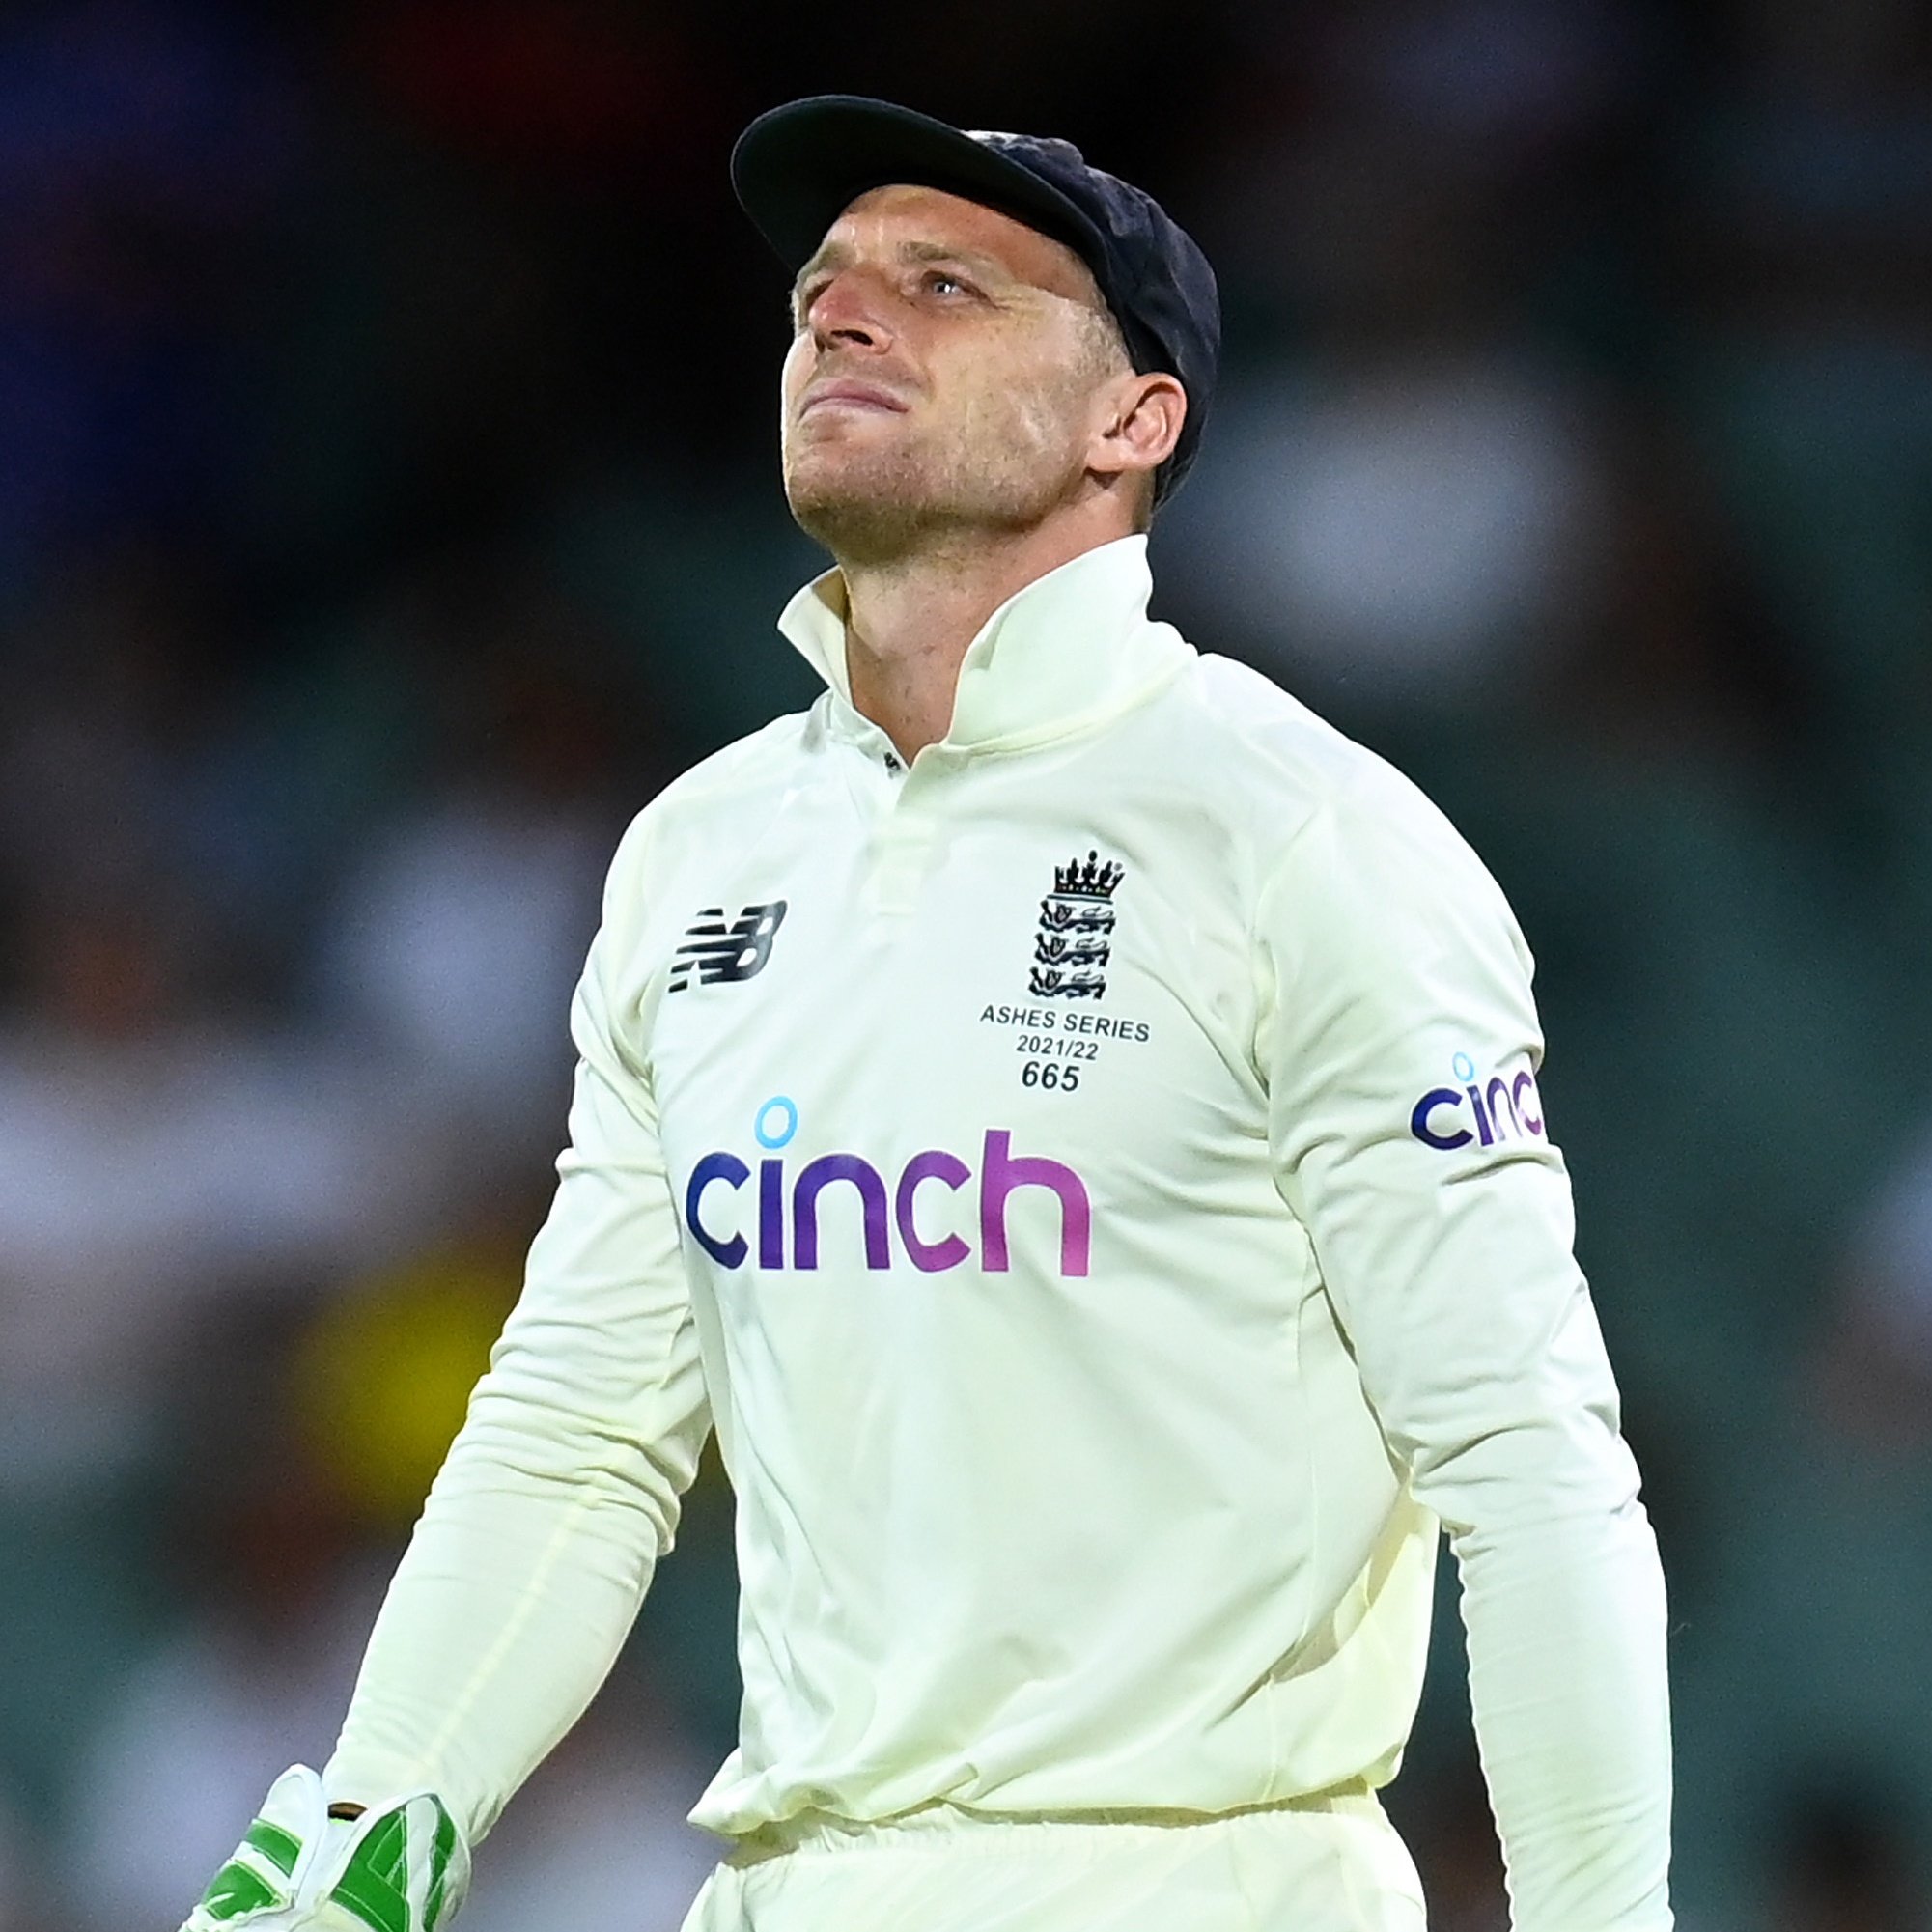 Ashes 2021-22 | We are not gelling as a group and individually playing well enough, says Jos Buttler